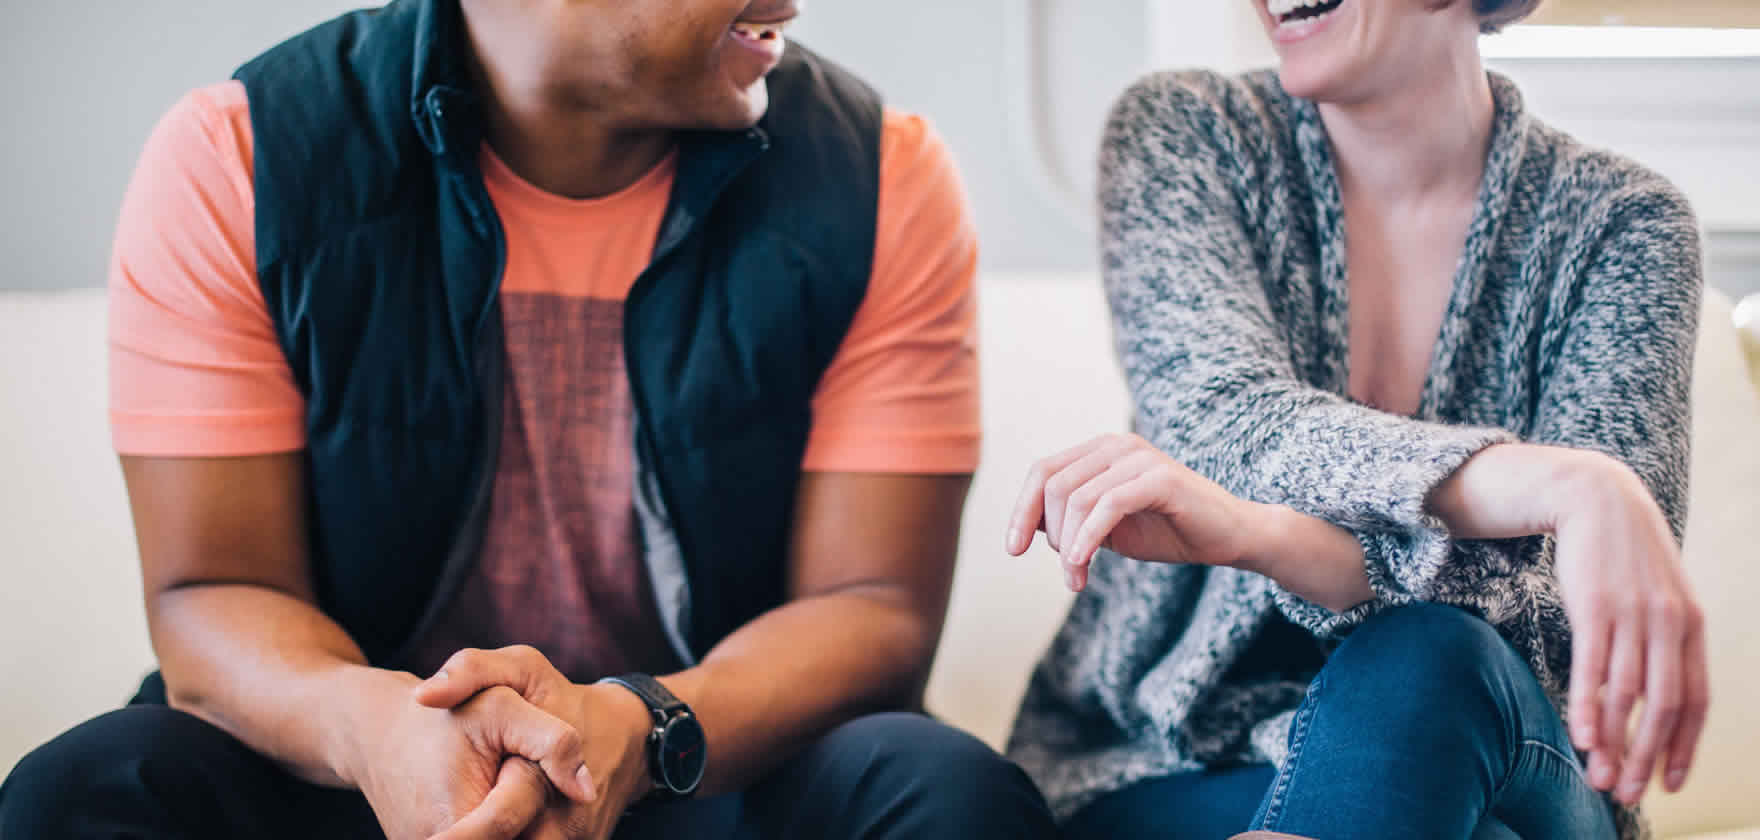 Fostering Conversations That Connect - Lewis Center for Church Leadership